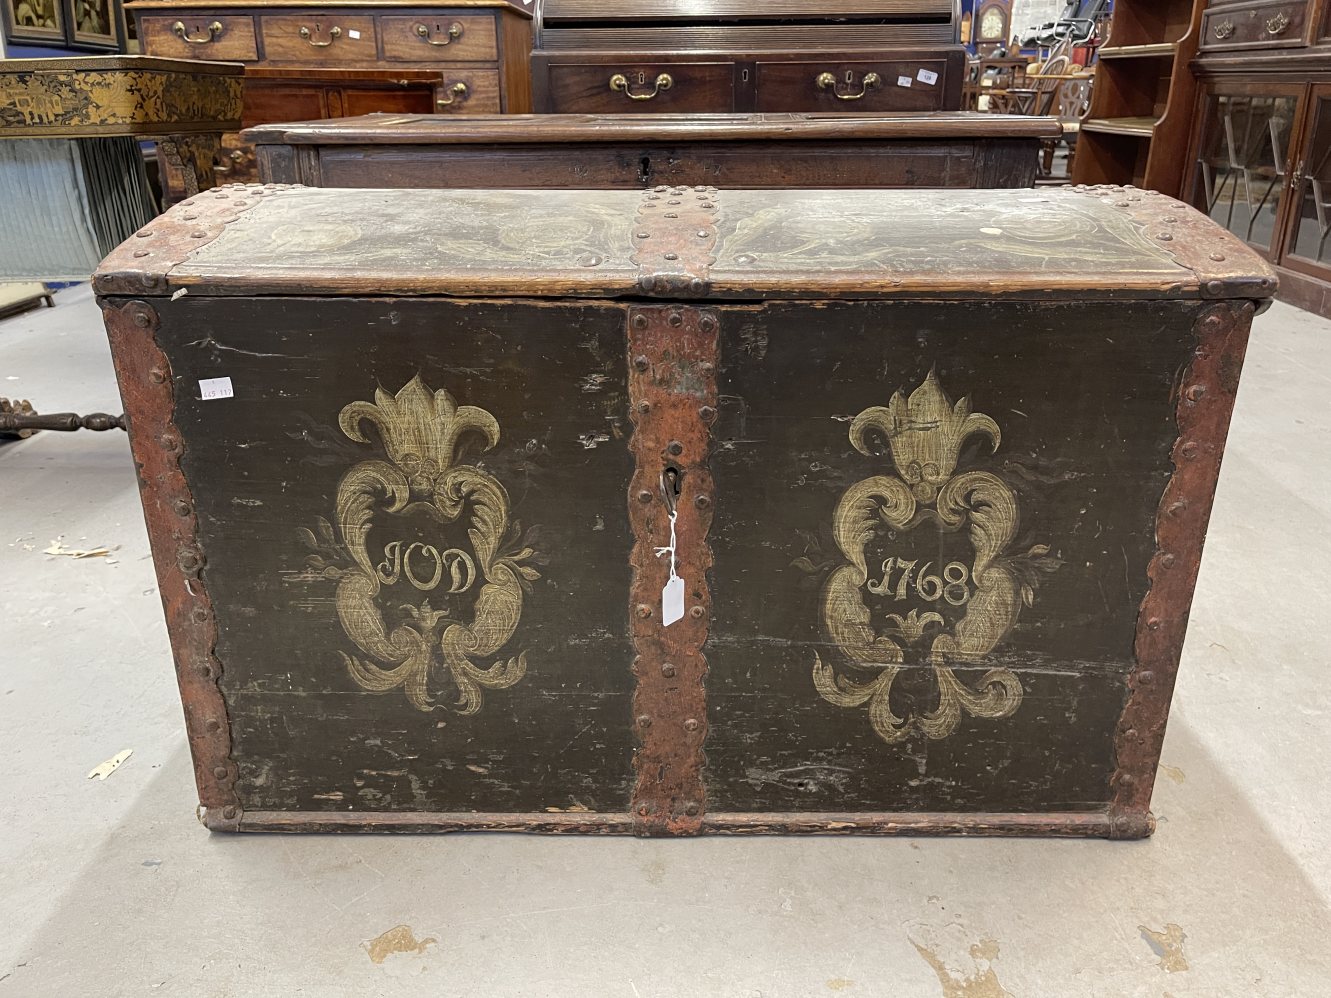 Late 18th cent. Scandinavian Folk Art: Marriage chest, painted dome with original decoration,